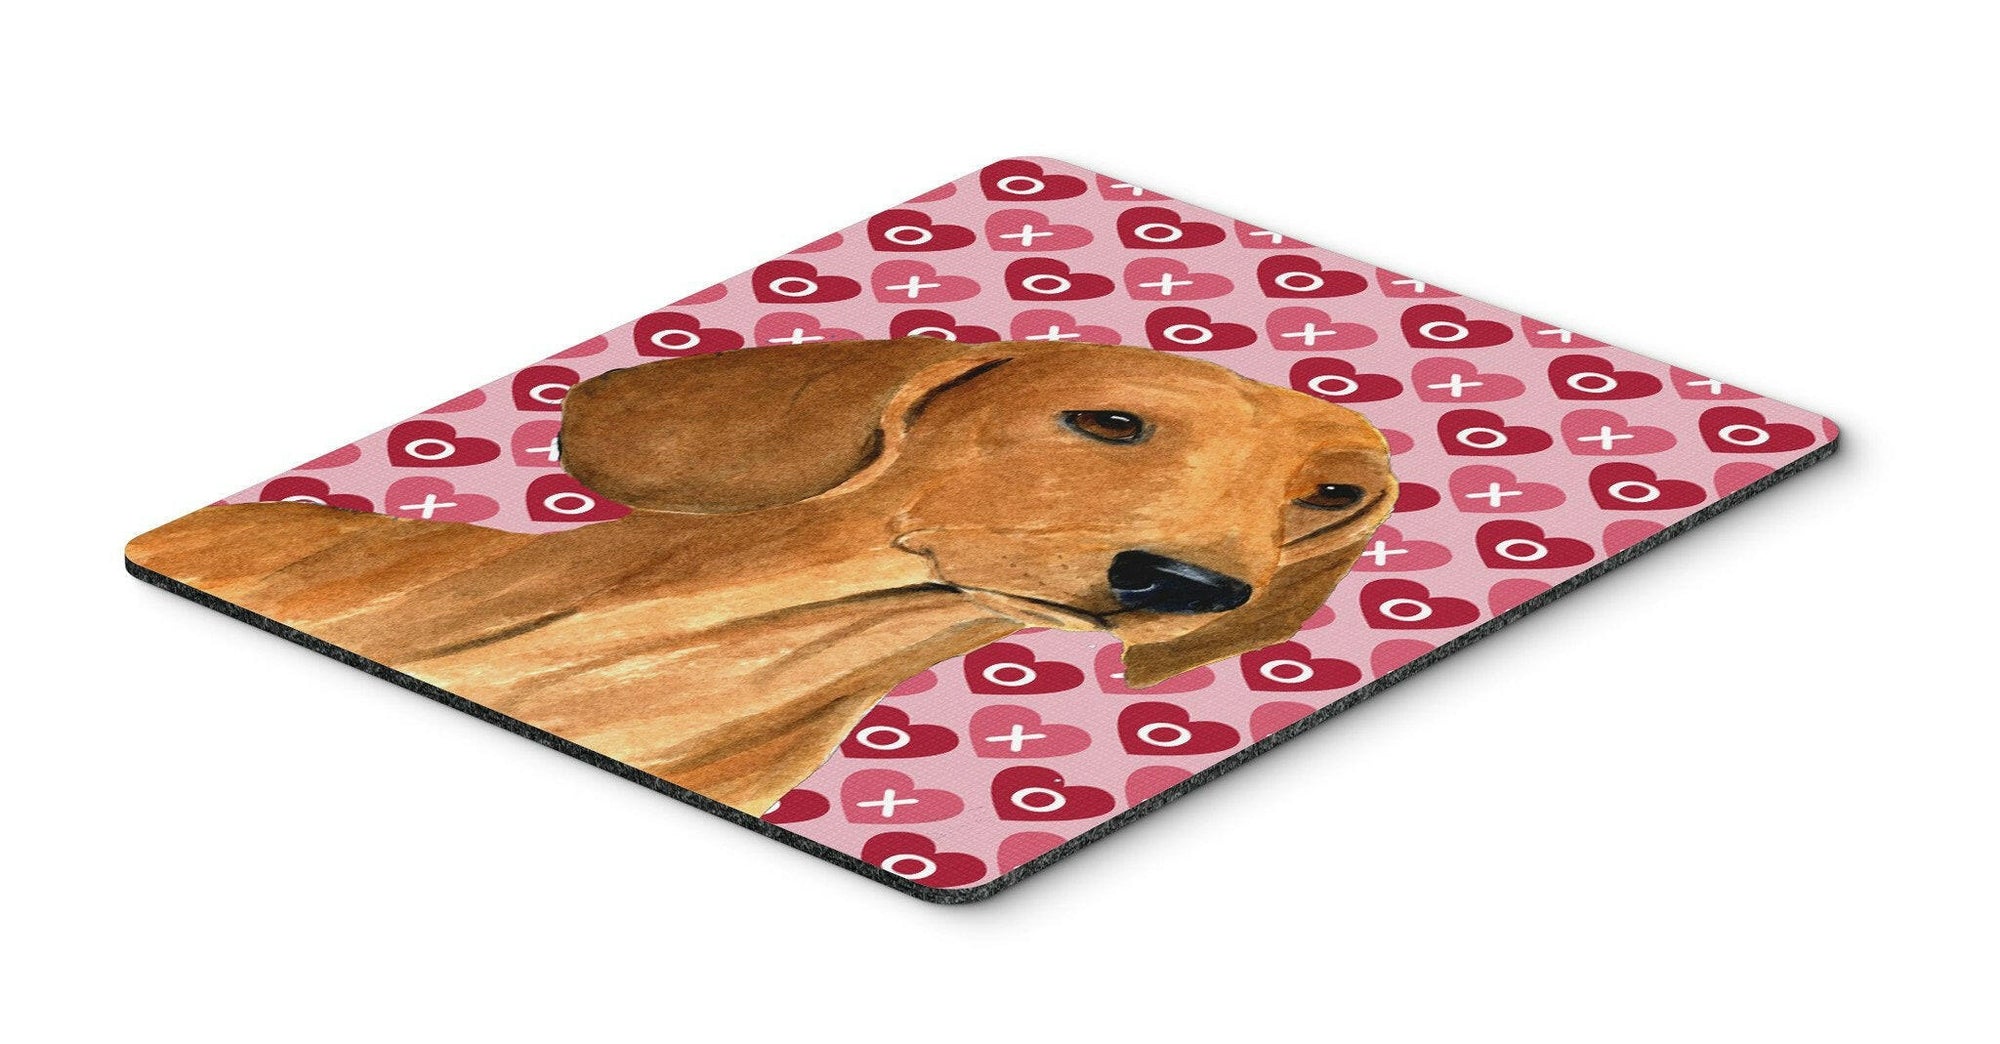 Dachshund Hearts Love and Valentine's Day Portrait Mouse Pad, Hot Pad or Trivet by Caroline's Treasures